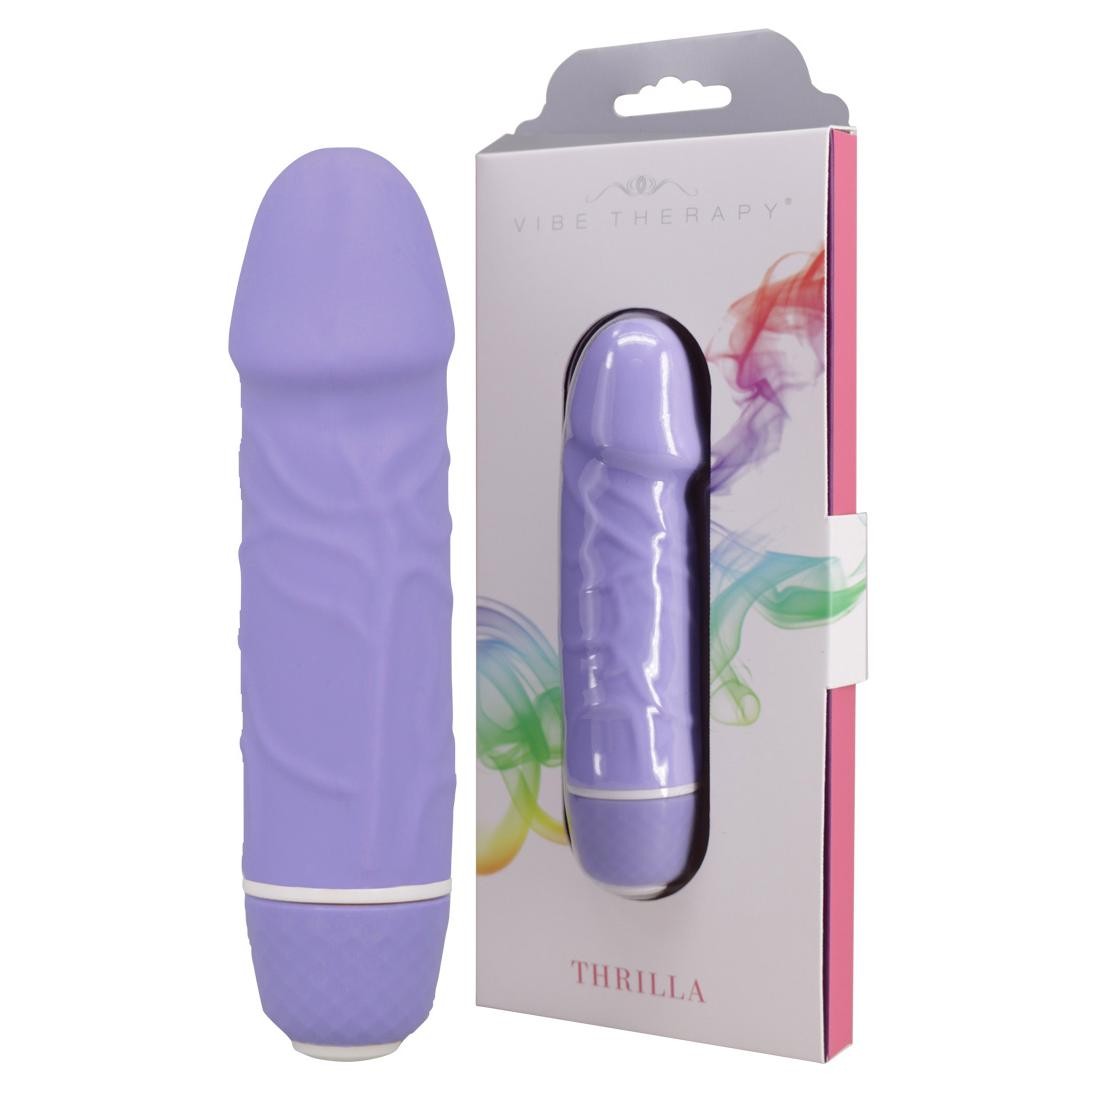  Vibe  Therapy  -  Vibe  Therapy  Thrilla  Lila 